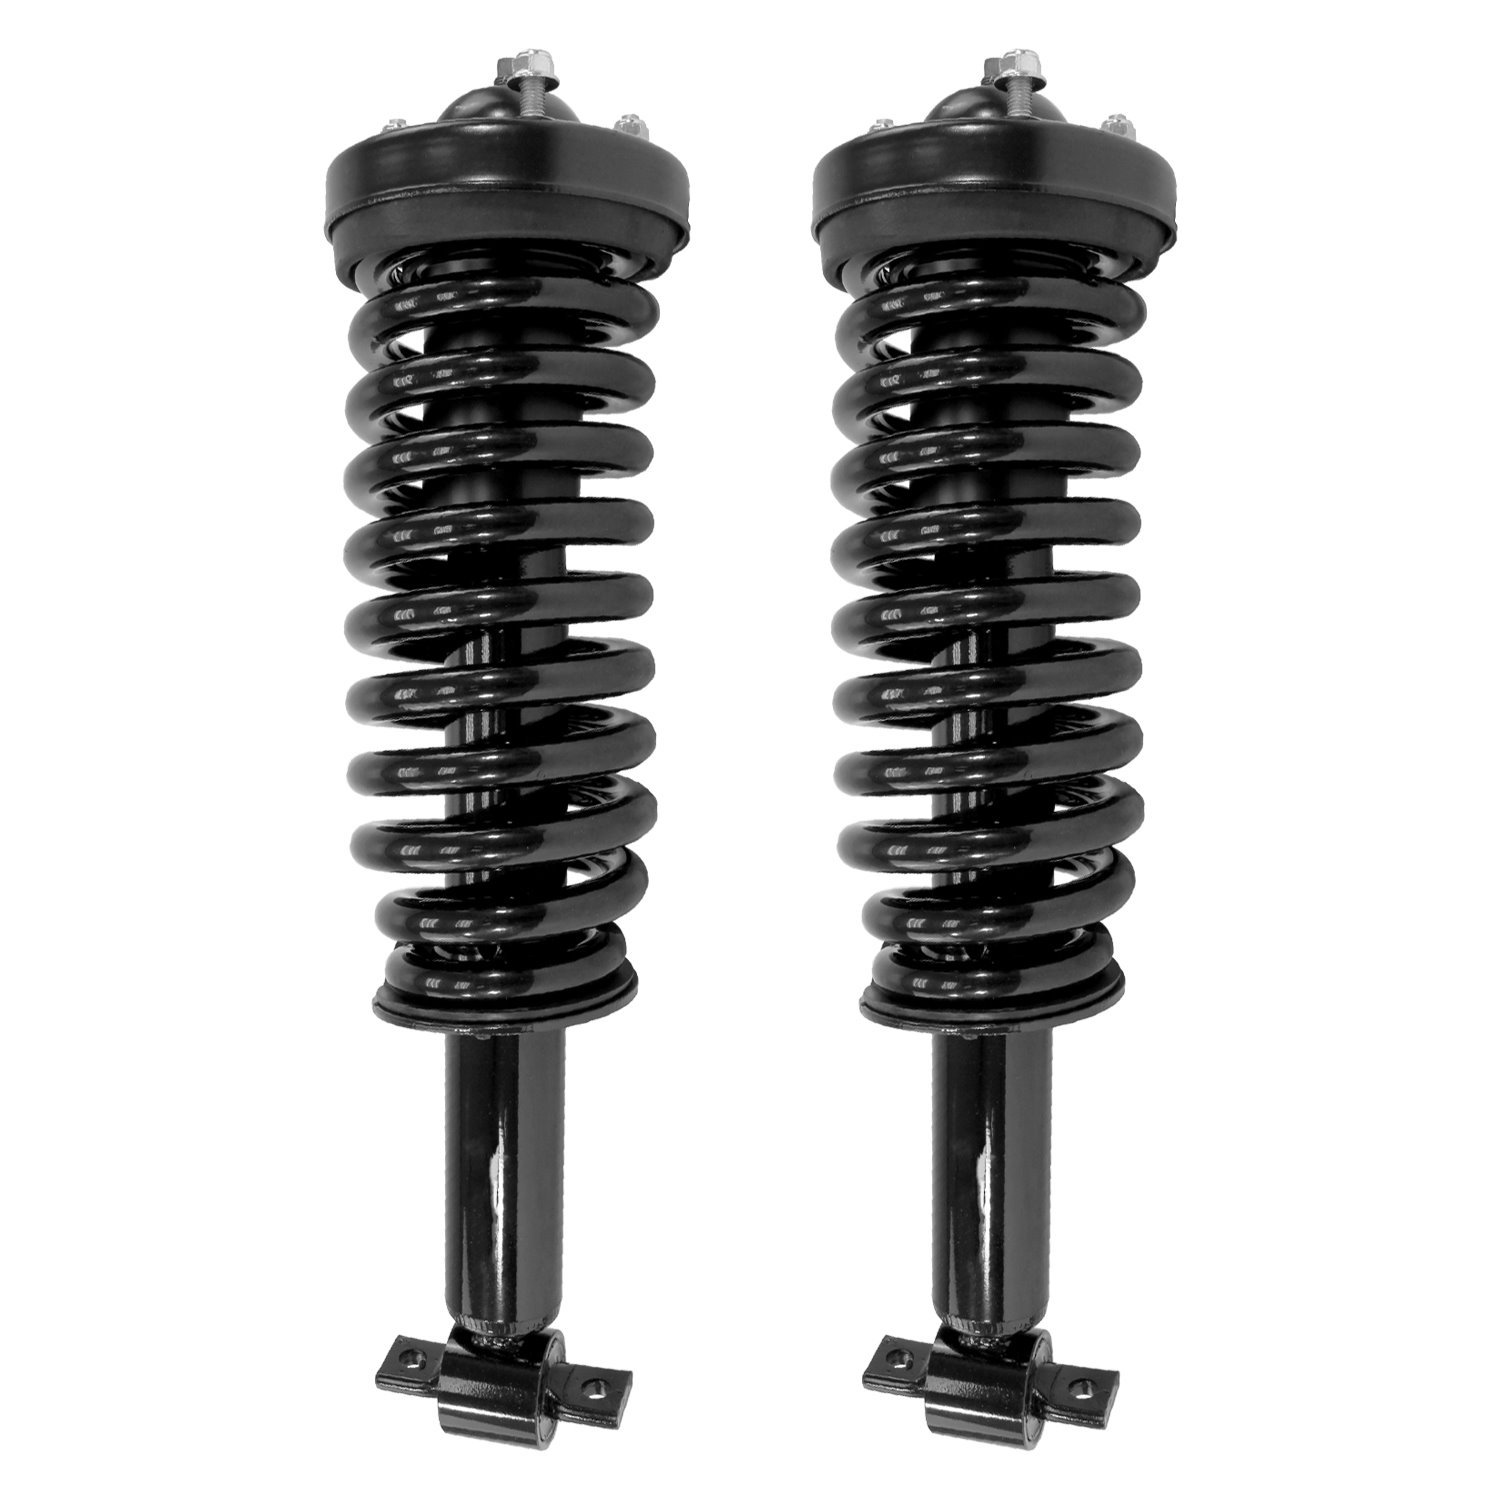 2-13530-001 Front Suspension Strut & Coil Spring Assemby Set Fits Select Ford Expedition, Lincoln Navigator